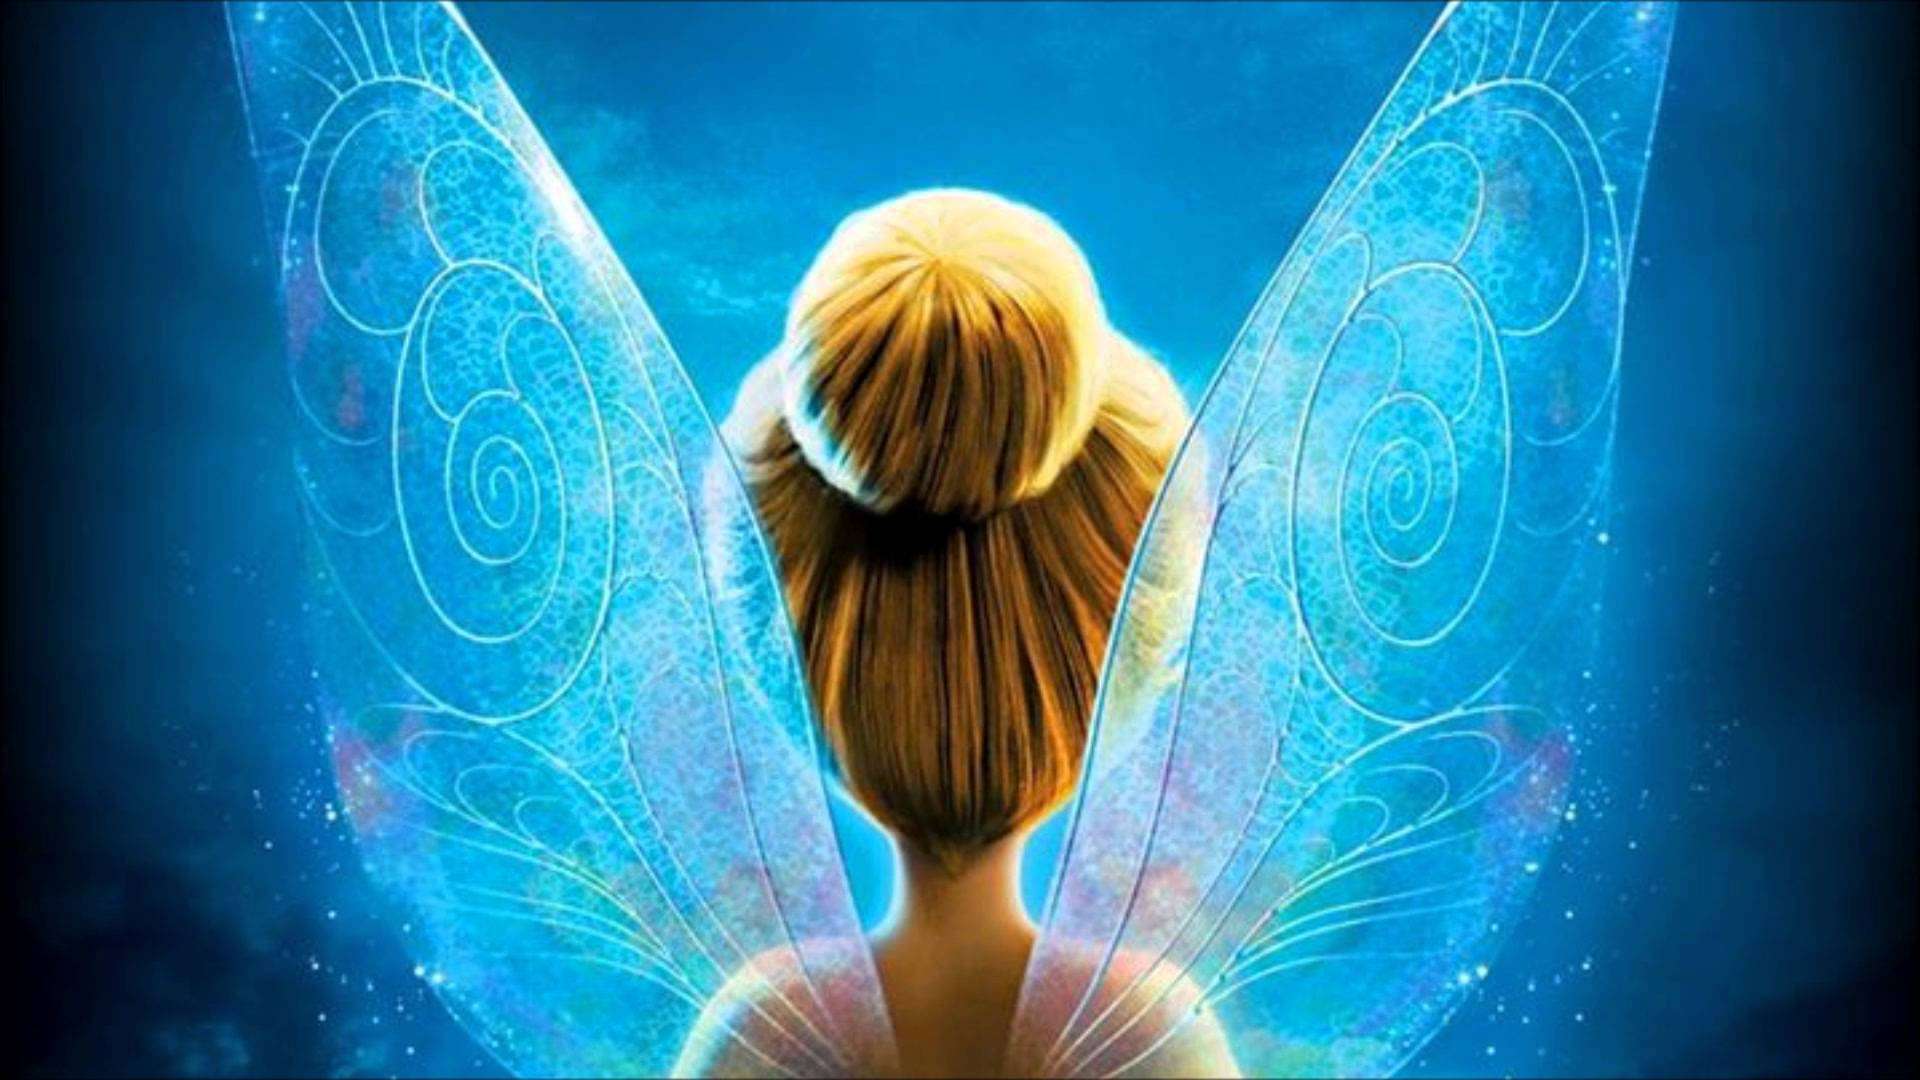 Tinkerbell Wallpaper HD & Tinkerbell Image Best Collection